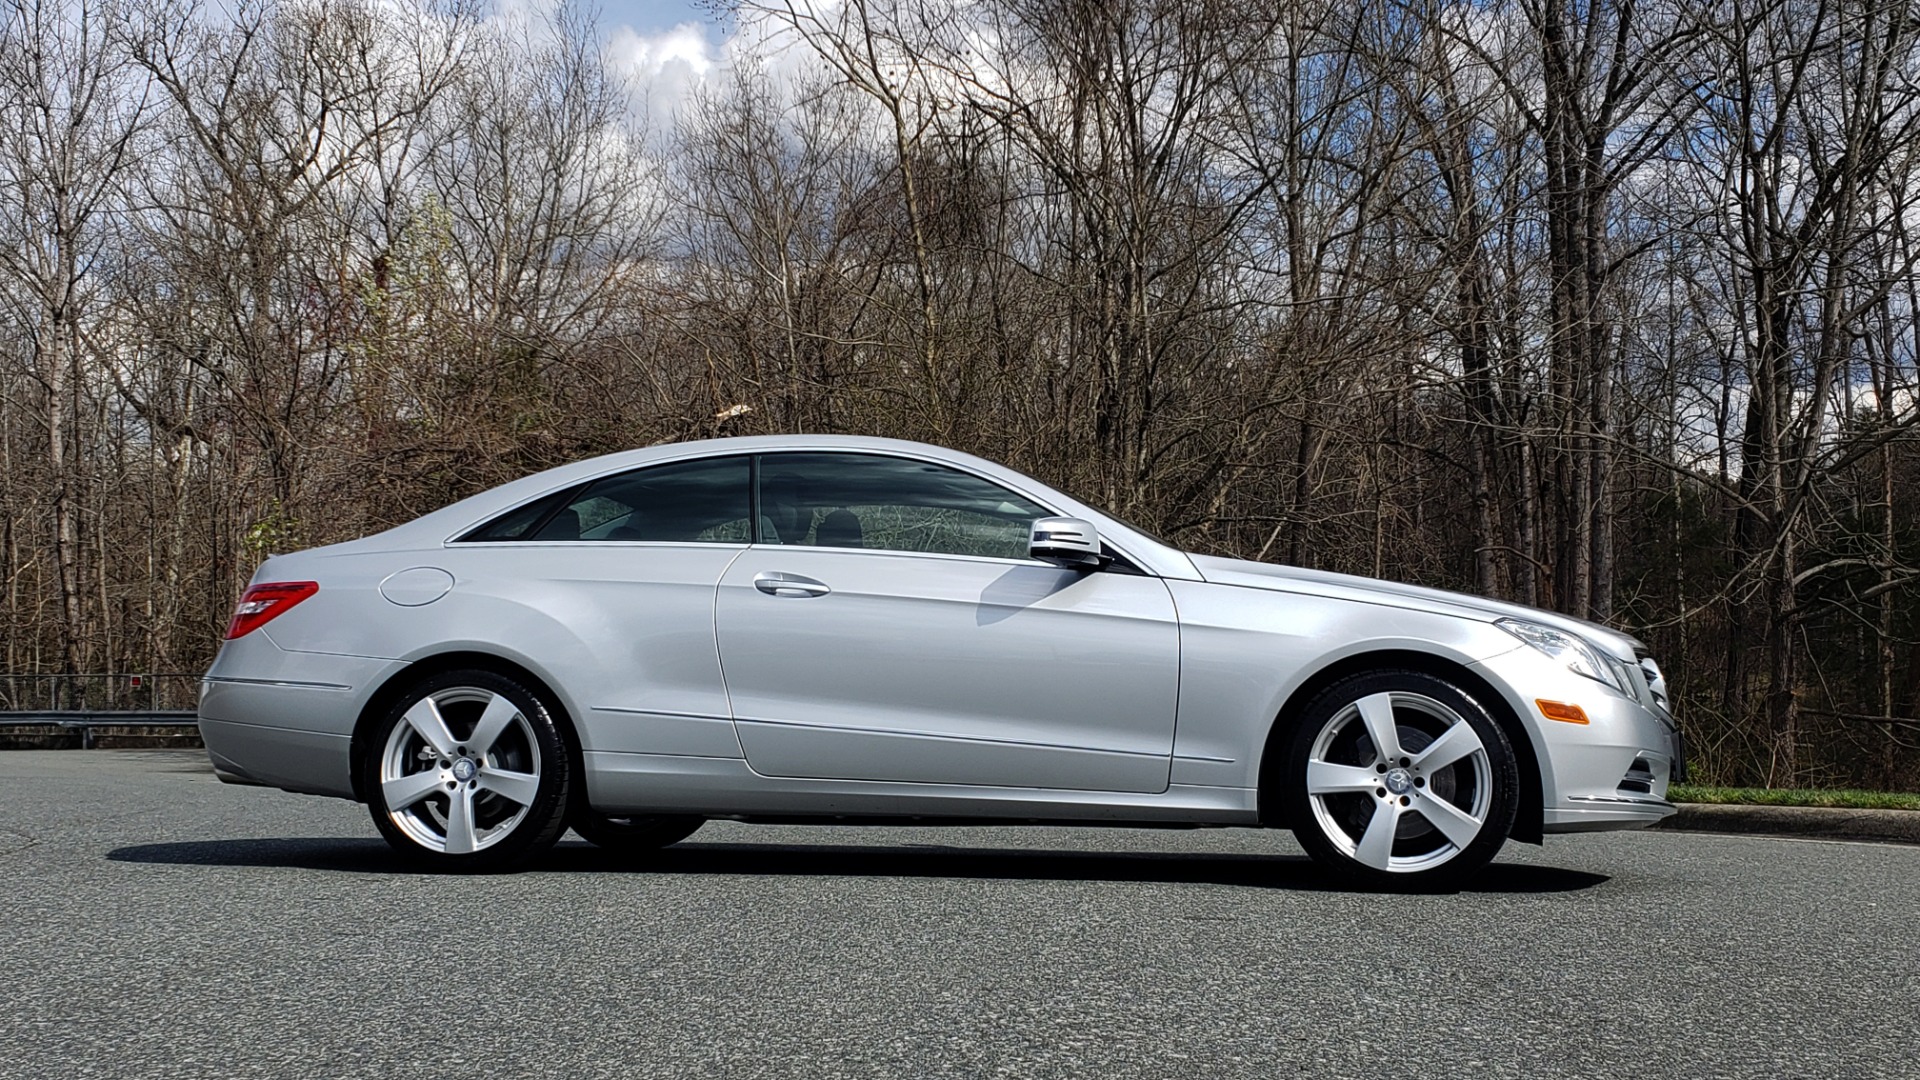 Used 2013 Mercedes-Benz E-CLASS E 350 COUPE PREM / NAV / PANO-ROFF / KEYLESS-GO / REARVIEW for sale Sold at Formula Imports in Charlotte NC 28227 6